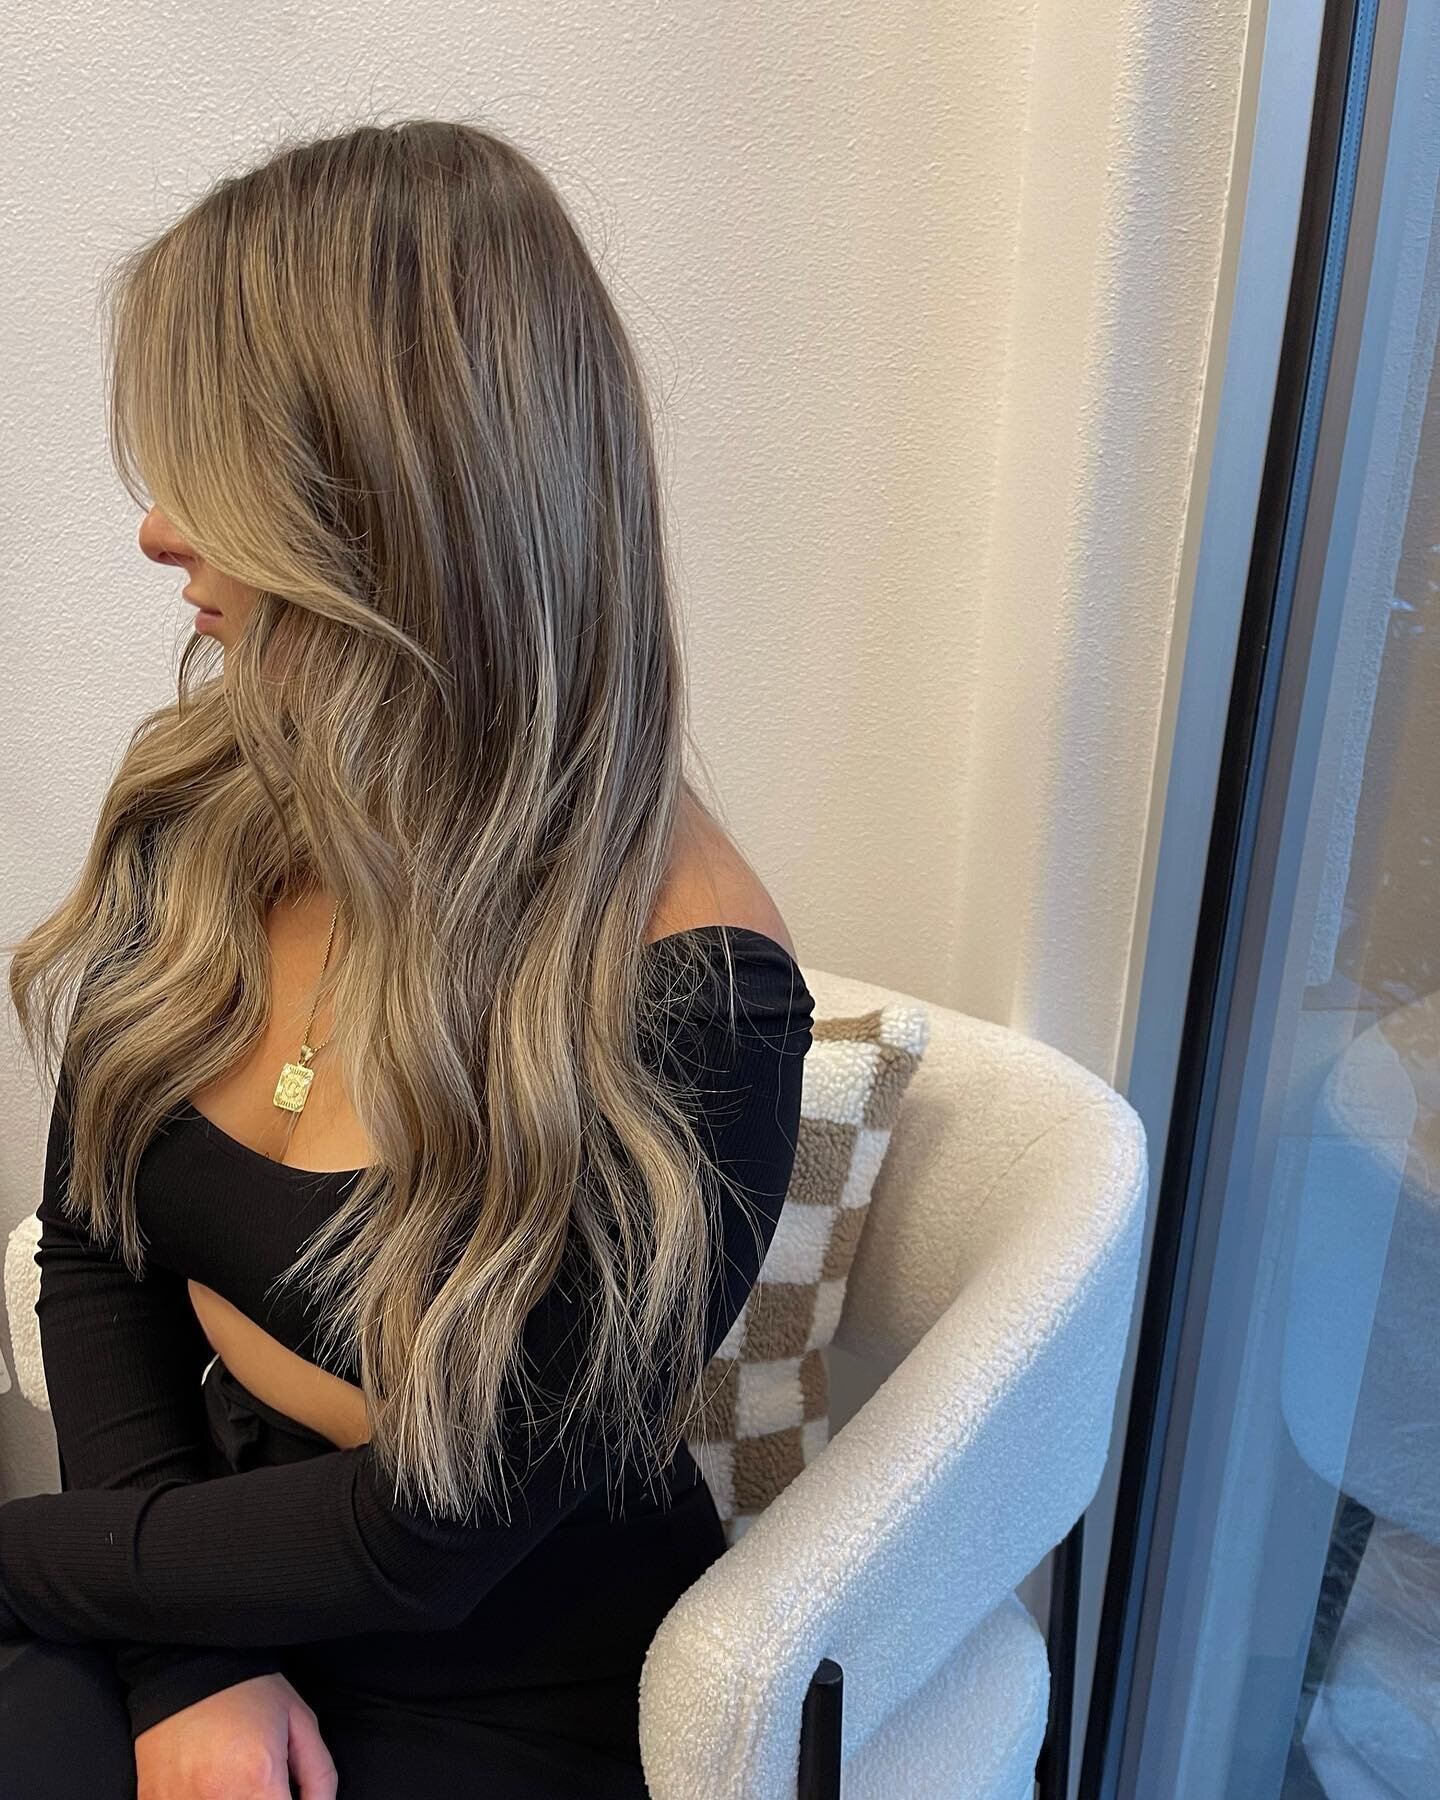 a whole mood. 🤎

fresh color + two rows of extensions changes the game.